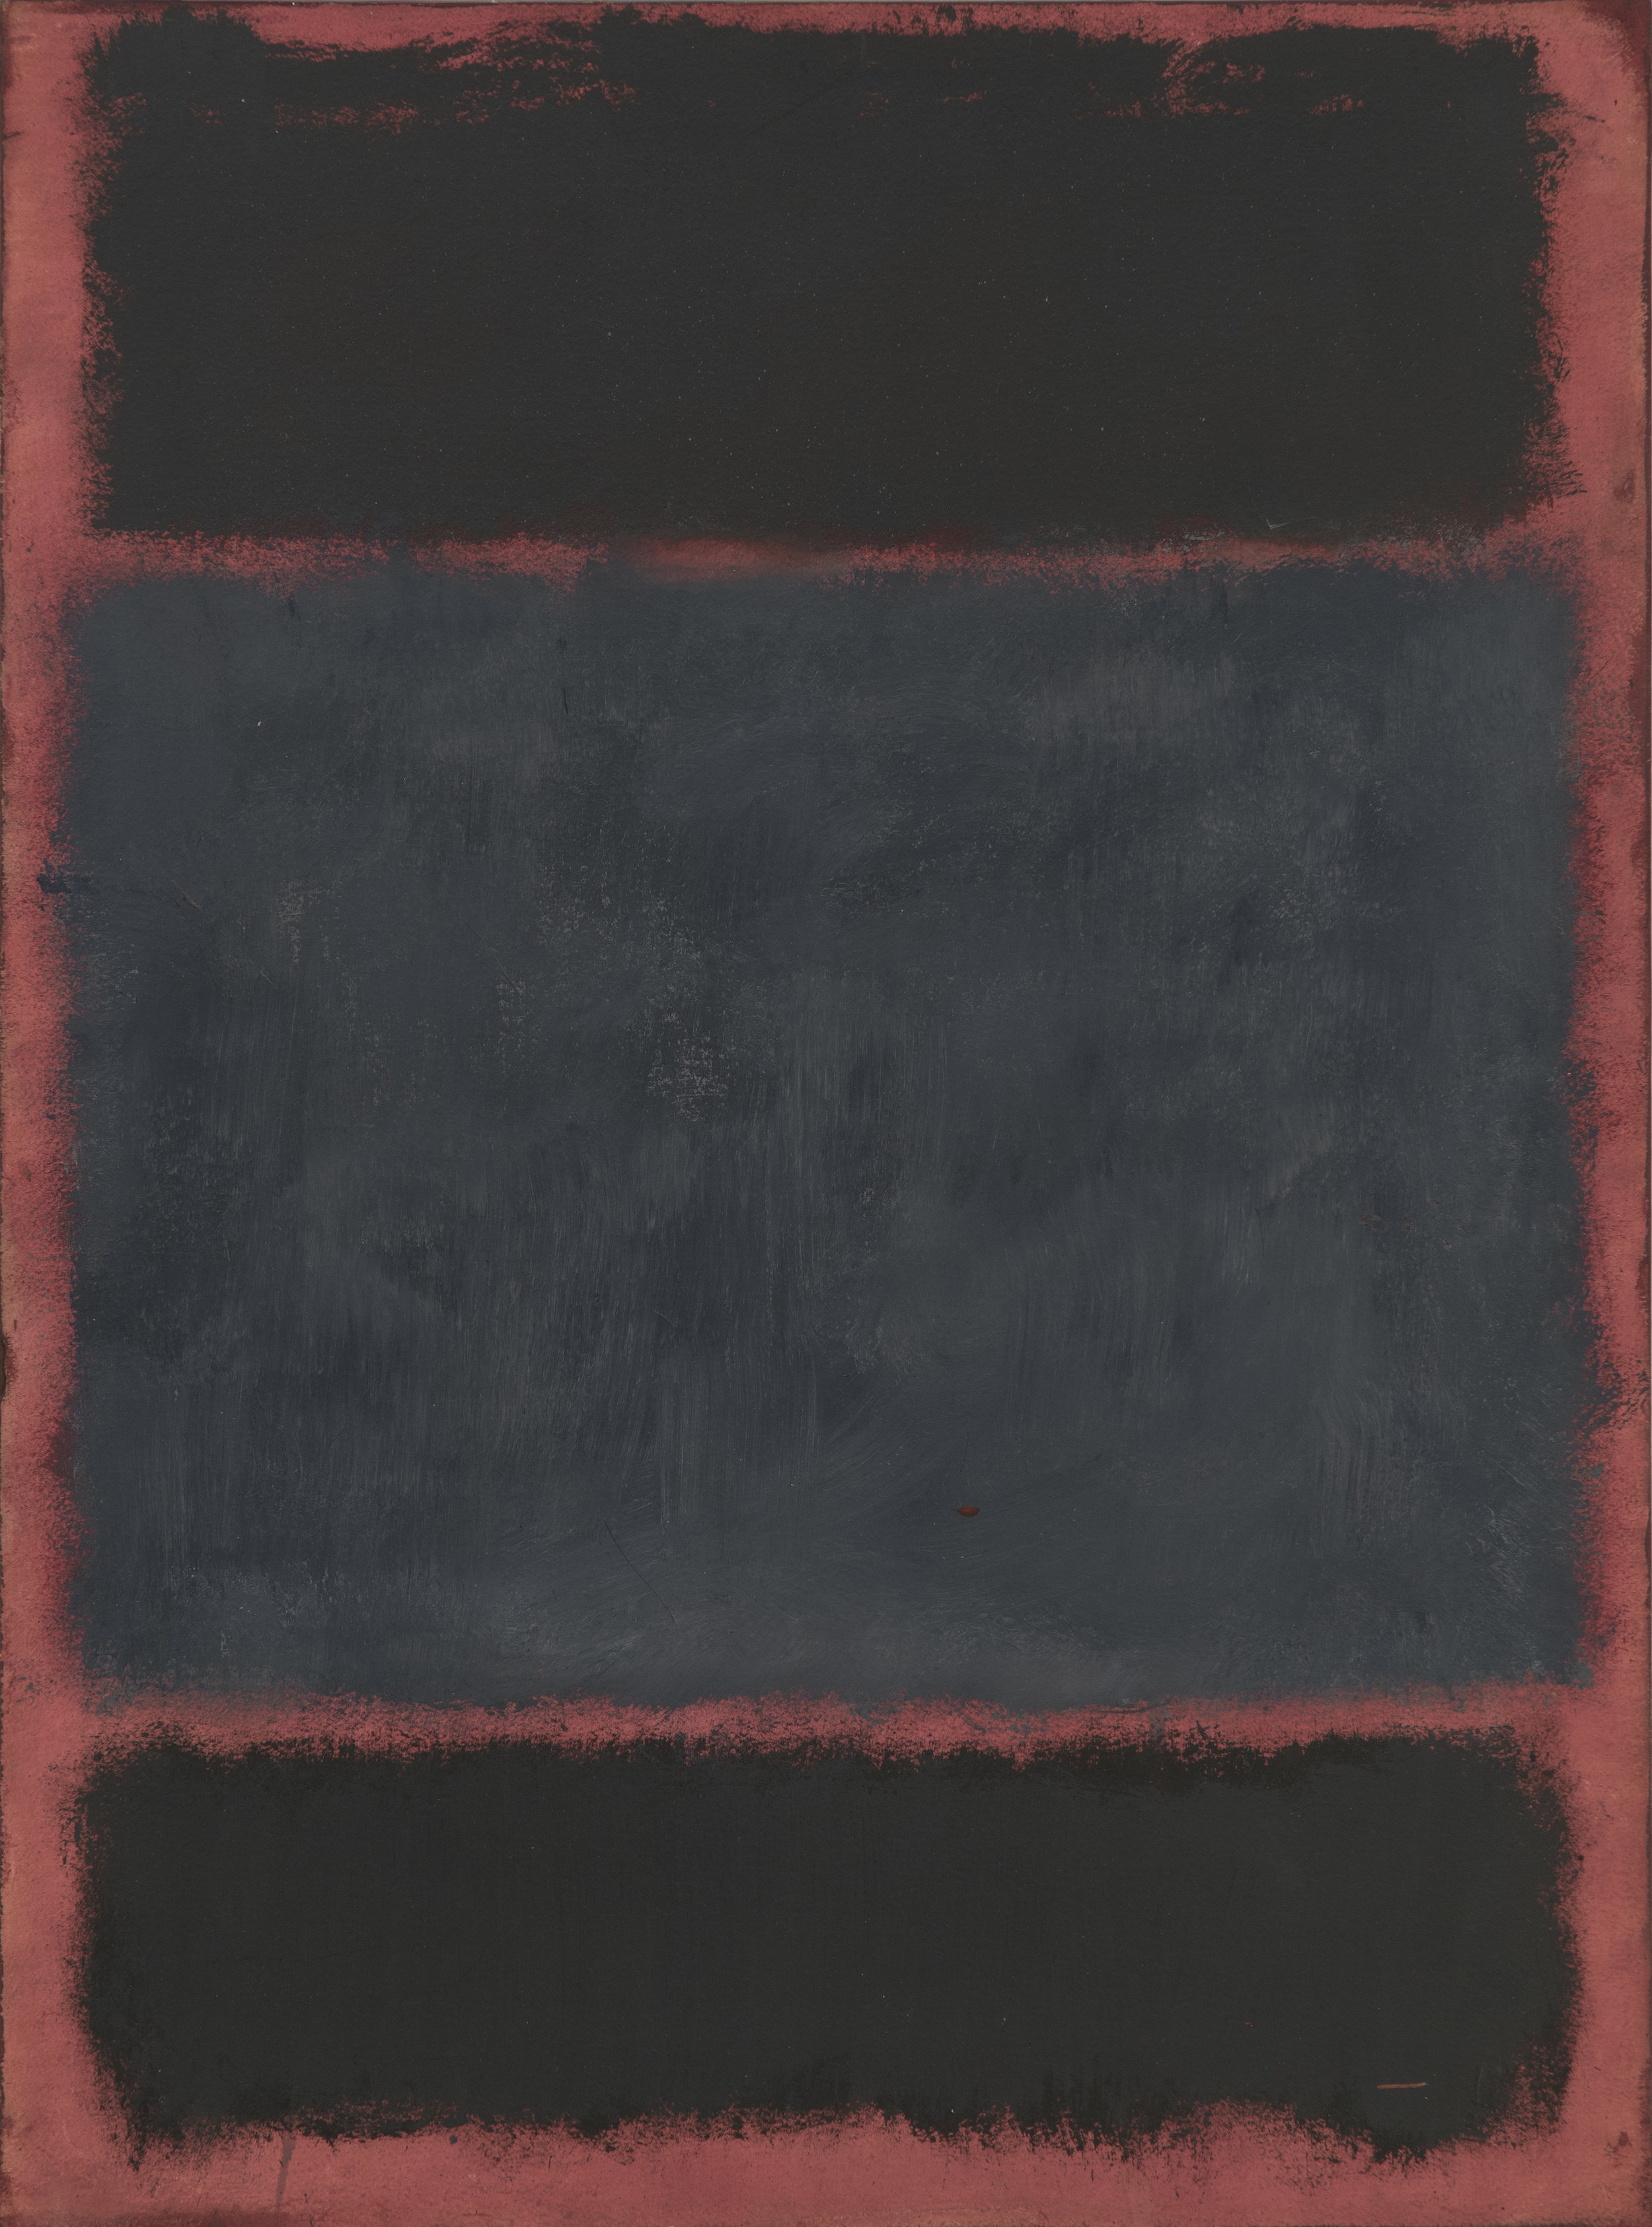  MARK ROTHKO (1903-1970)   Untitled , 1958.&nbsp;Oil on paper mounted on masonite.&nbsp;29 1/2 x 22 inches. 